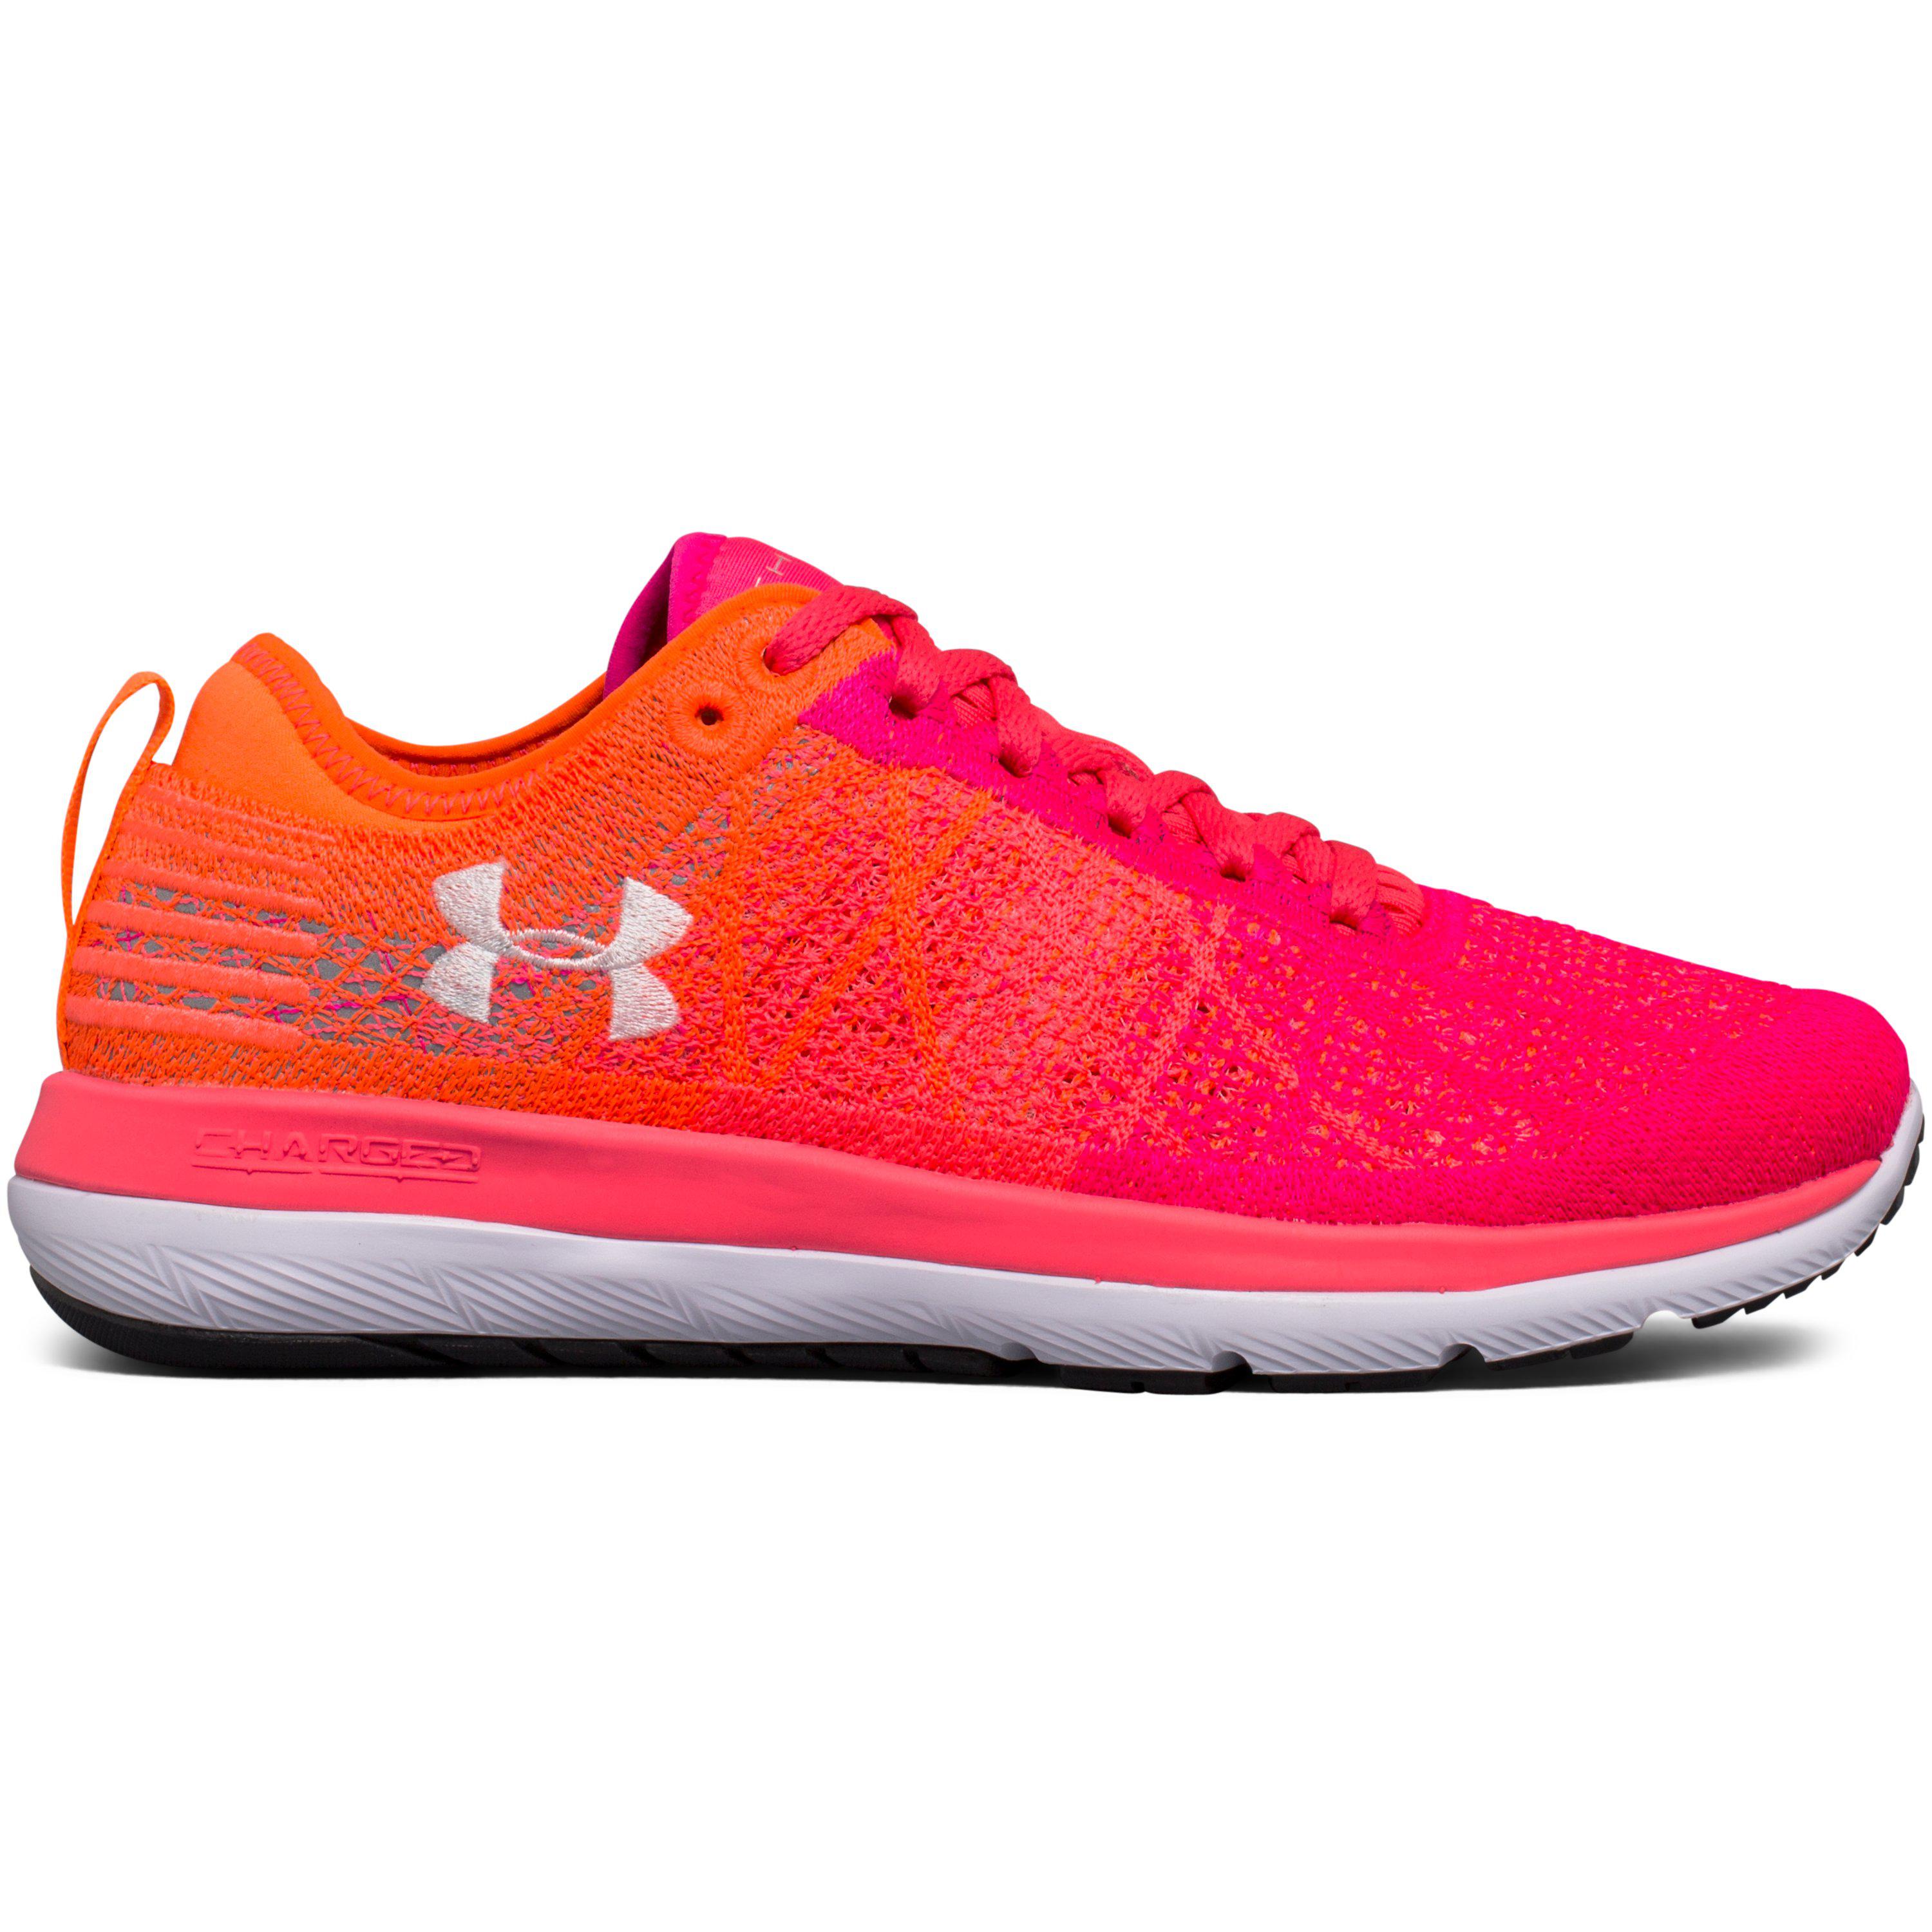 Under Armour Women's Ua Fortis 3 Running Shoes in Pink | Lyst